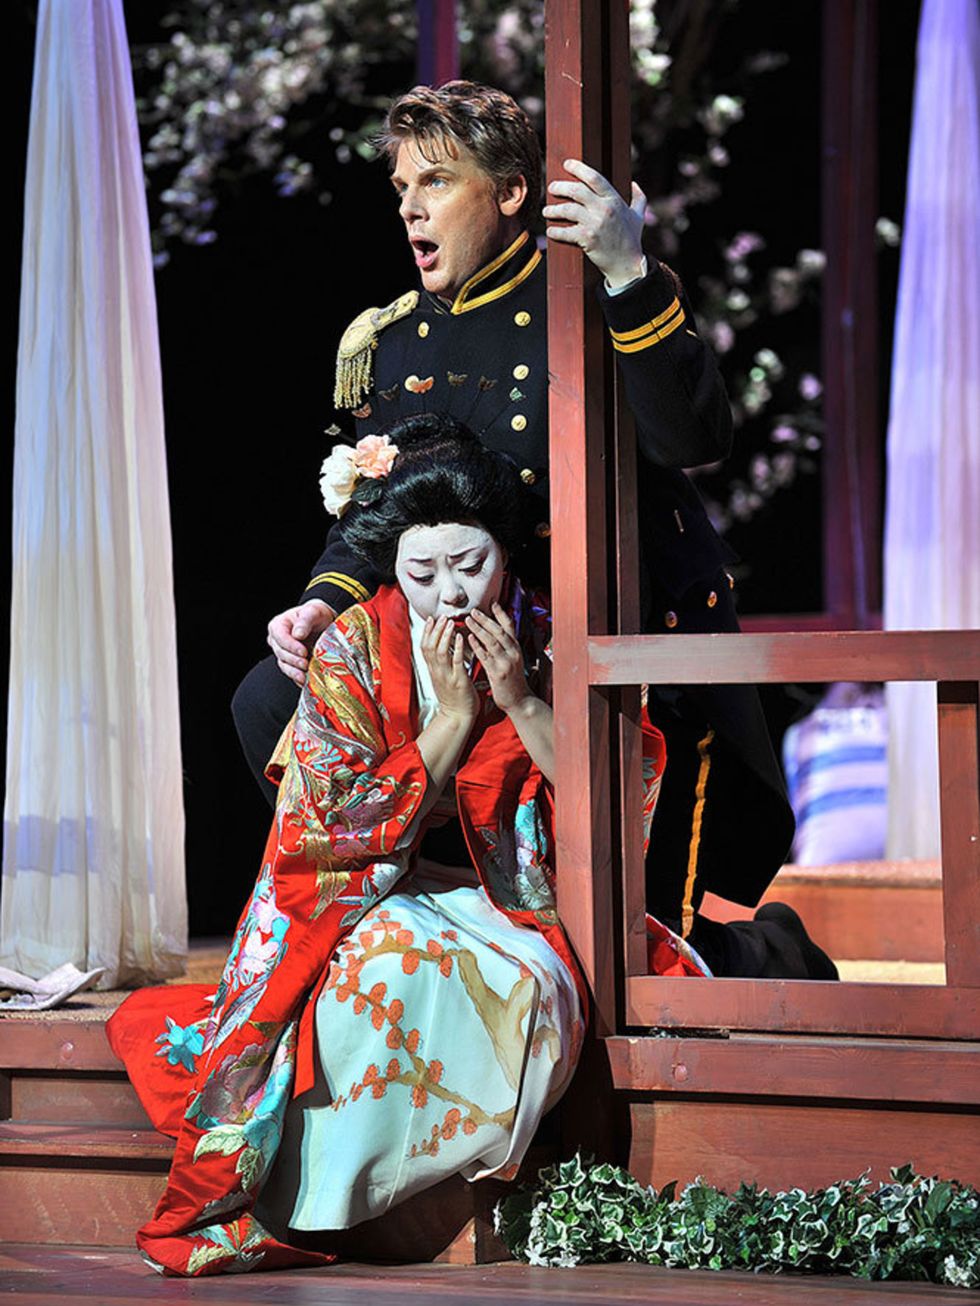 <p><strong>THEATRE: Madame Butterfly </strong></p>

<p>The Royal Albert Hall will be transformed into a charming Japanese water garden for the return of Puccinis tale of tragic love, Madame Butterfly.</p>

<p>Set during the turn of the century, Puccinis